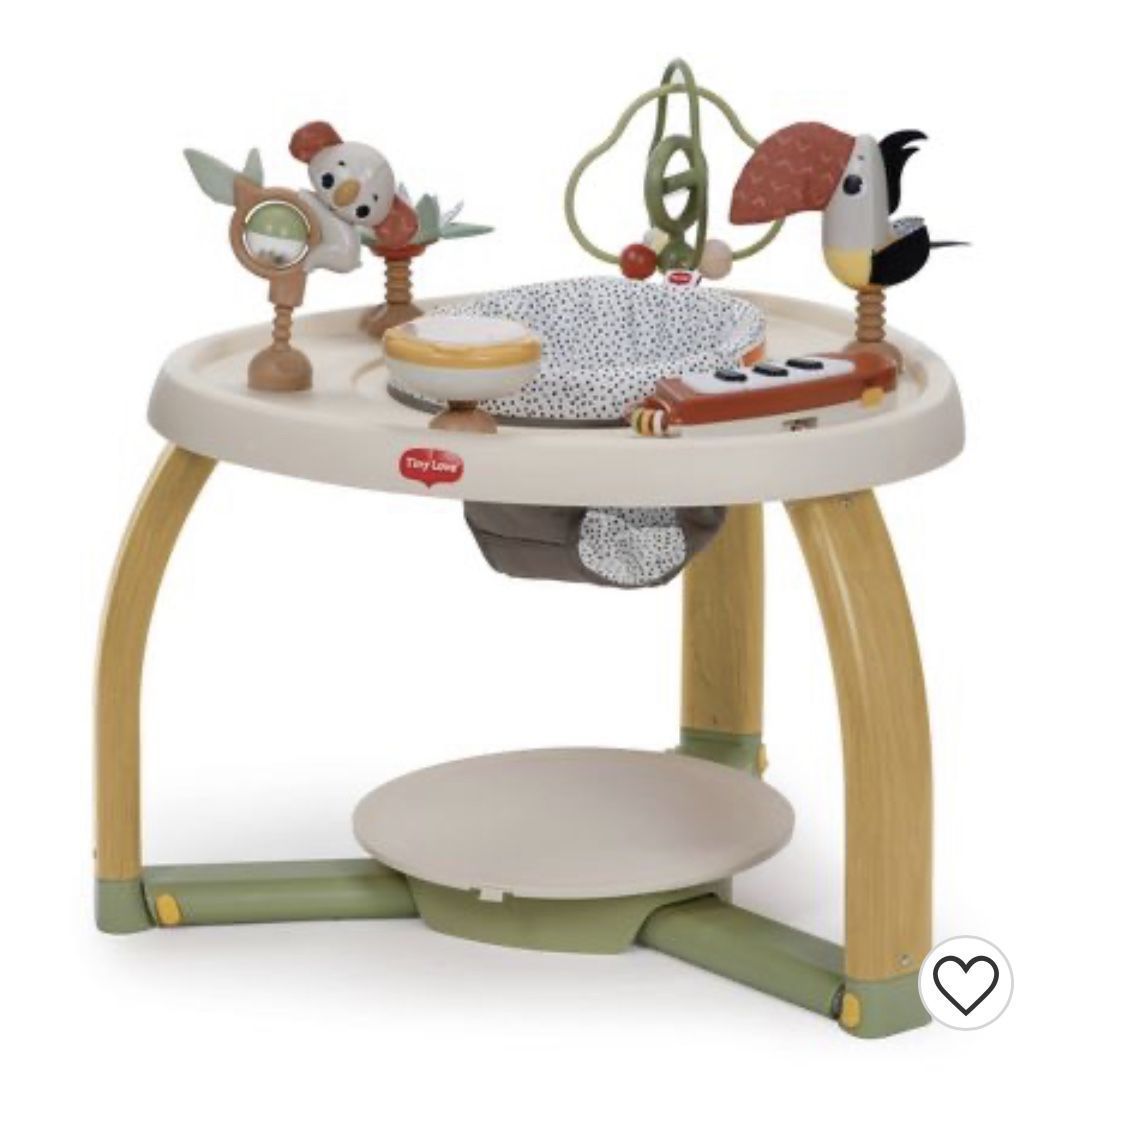 Brand New Tiny Love 5-in-1 Deluxe Stationary Activity Center - Bohoq